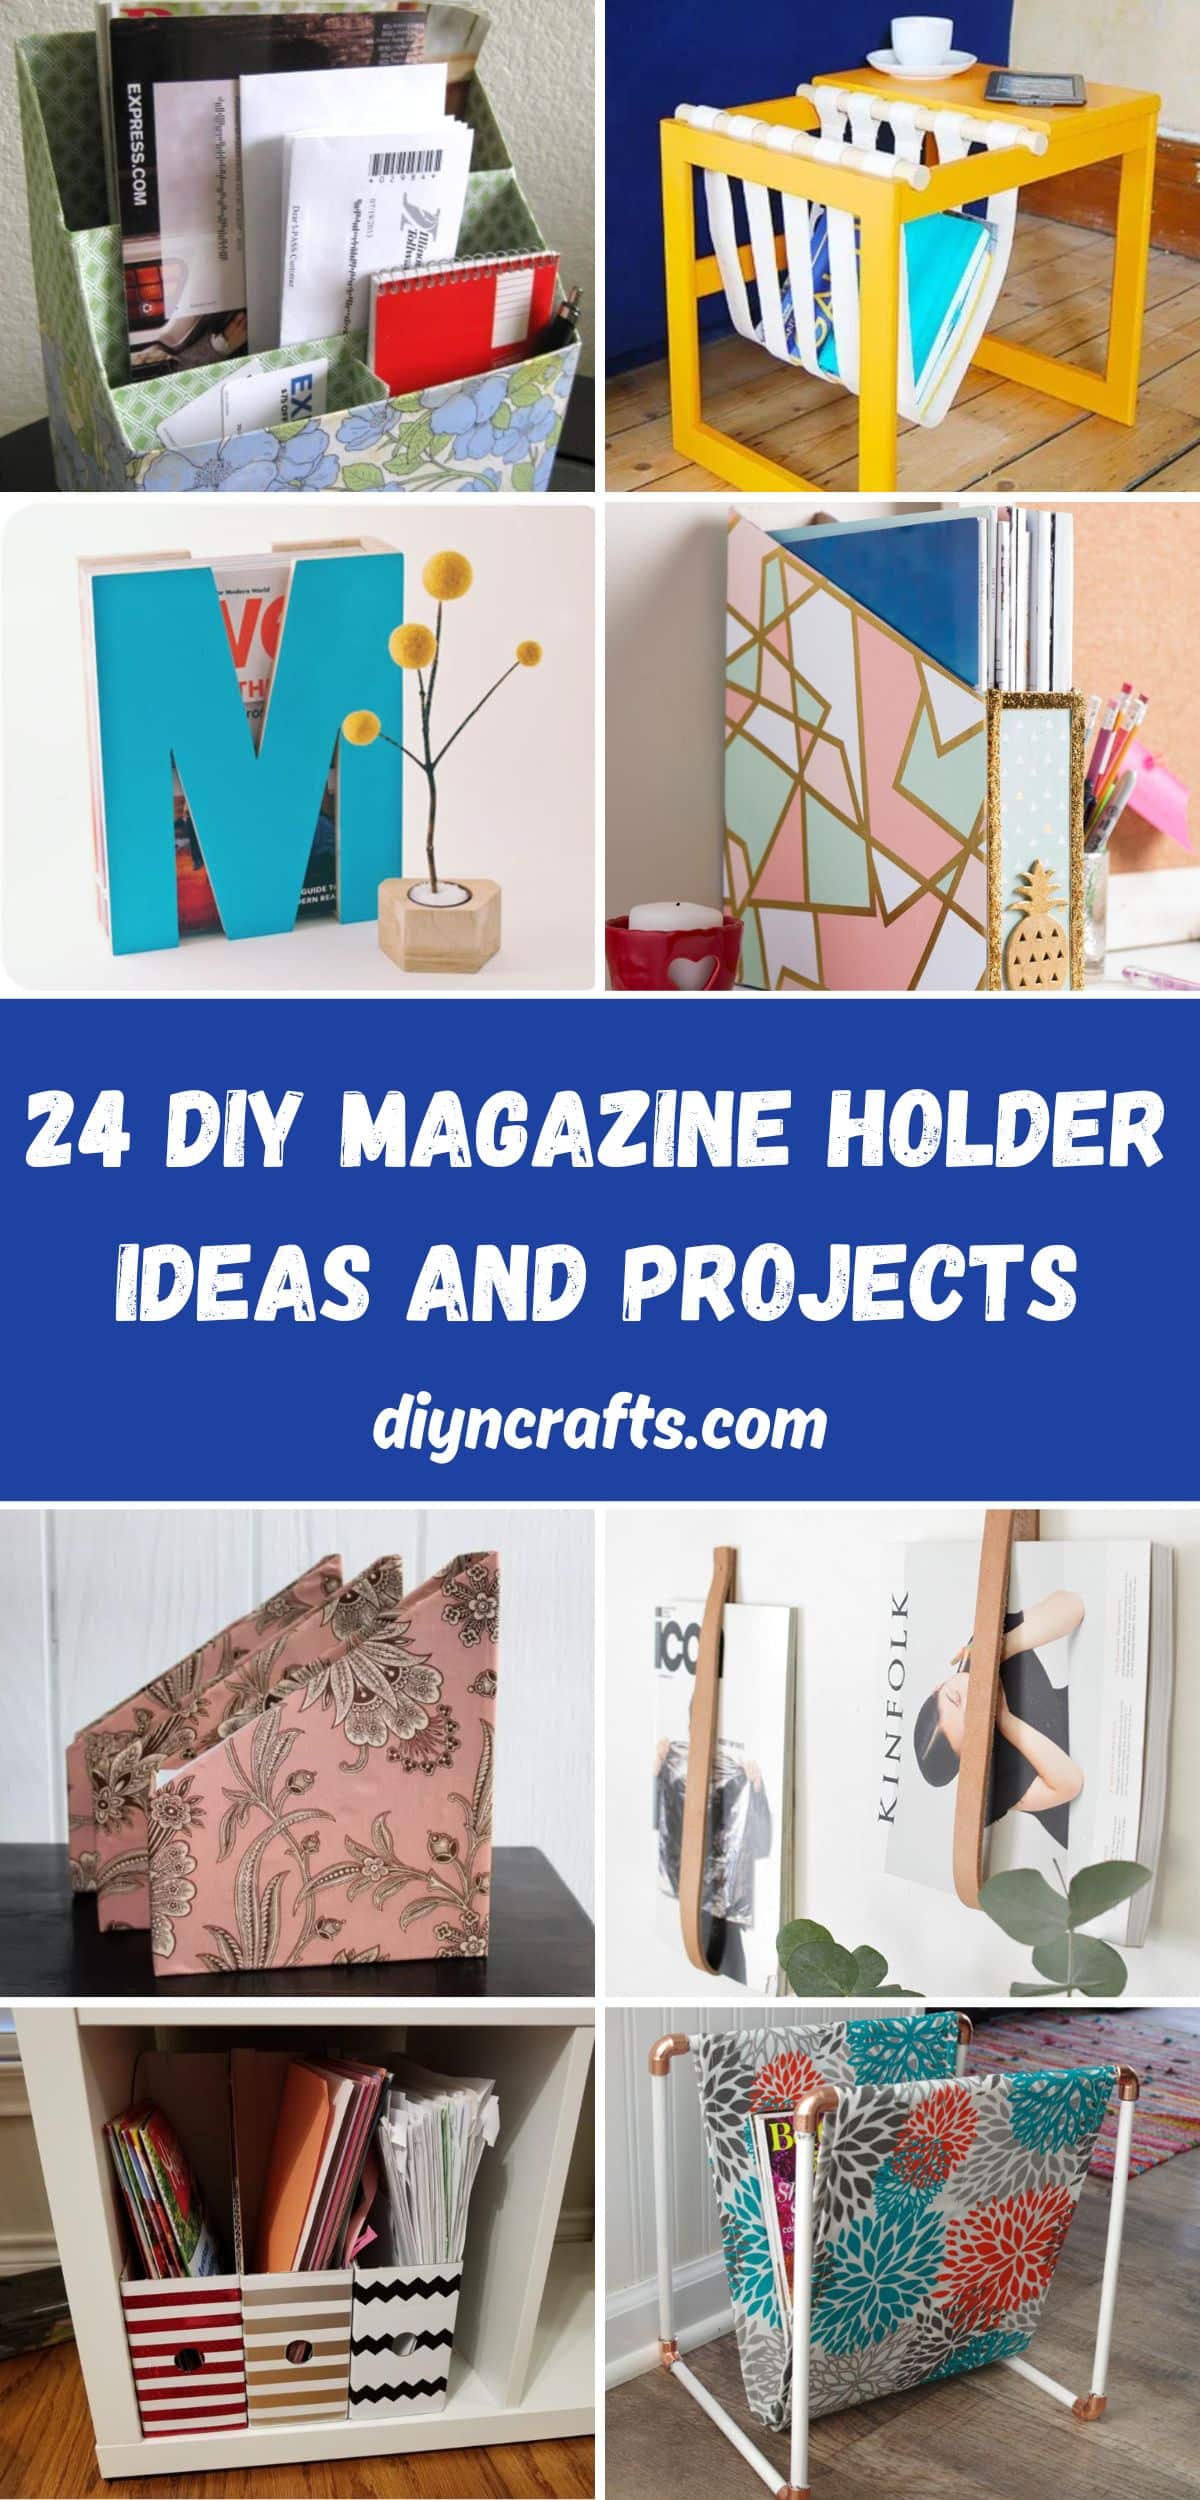 24 DIY Magazine Holder Ideas and Projects collage.